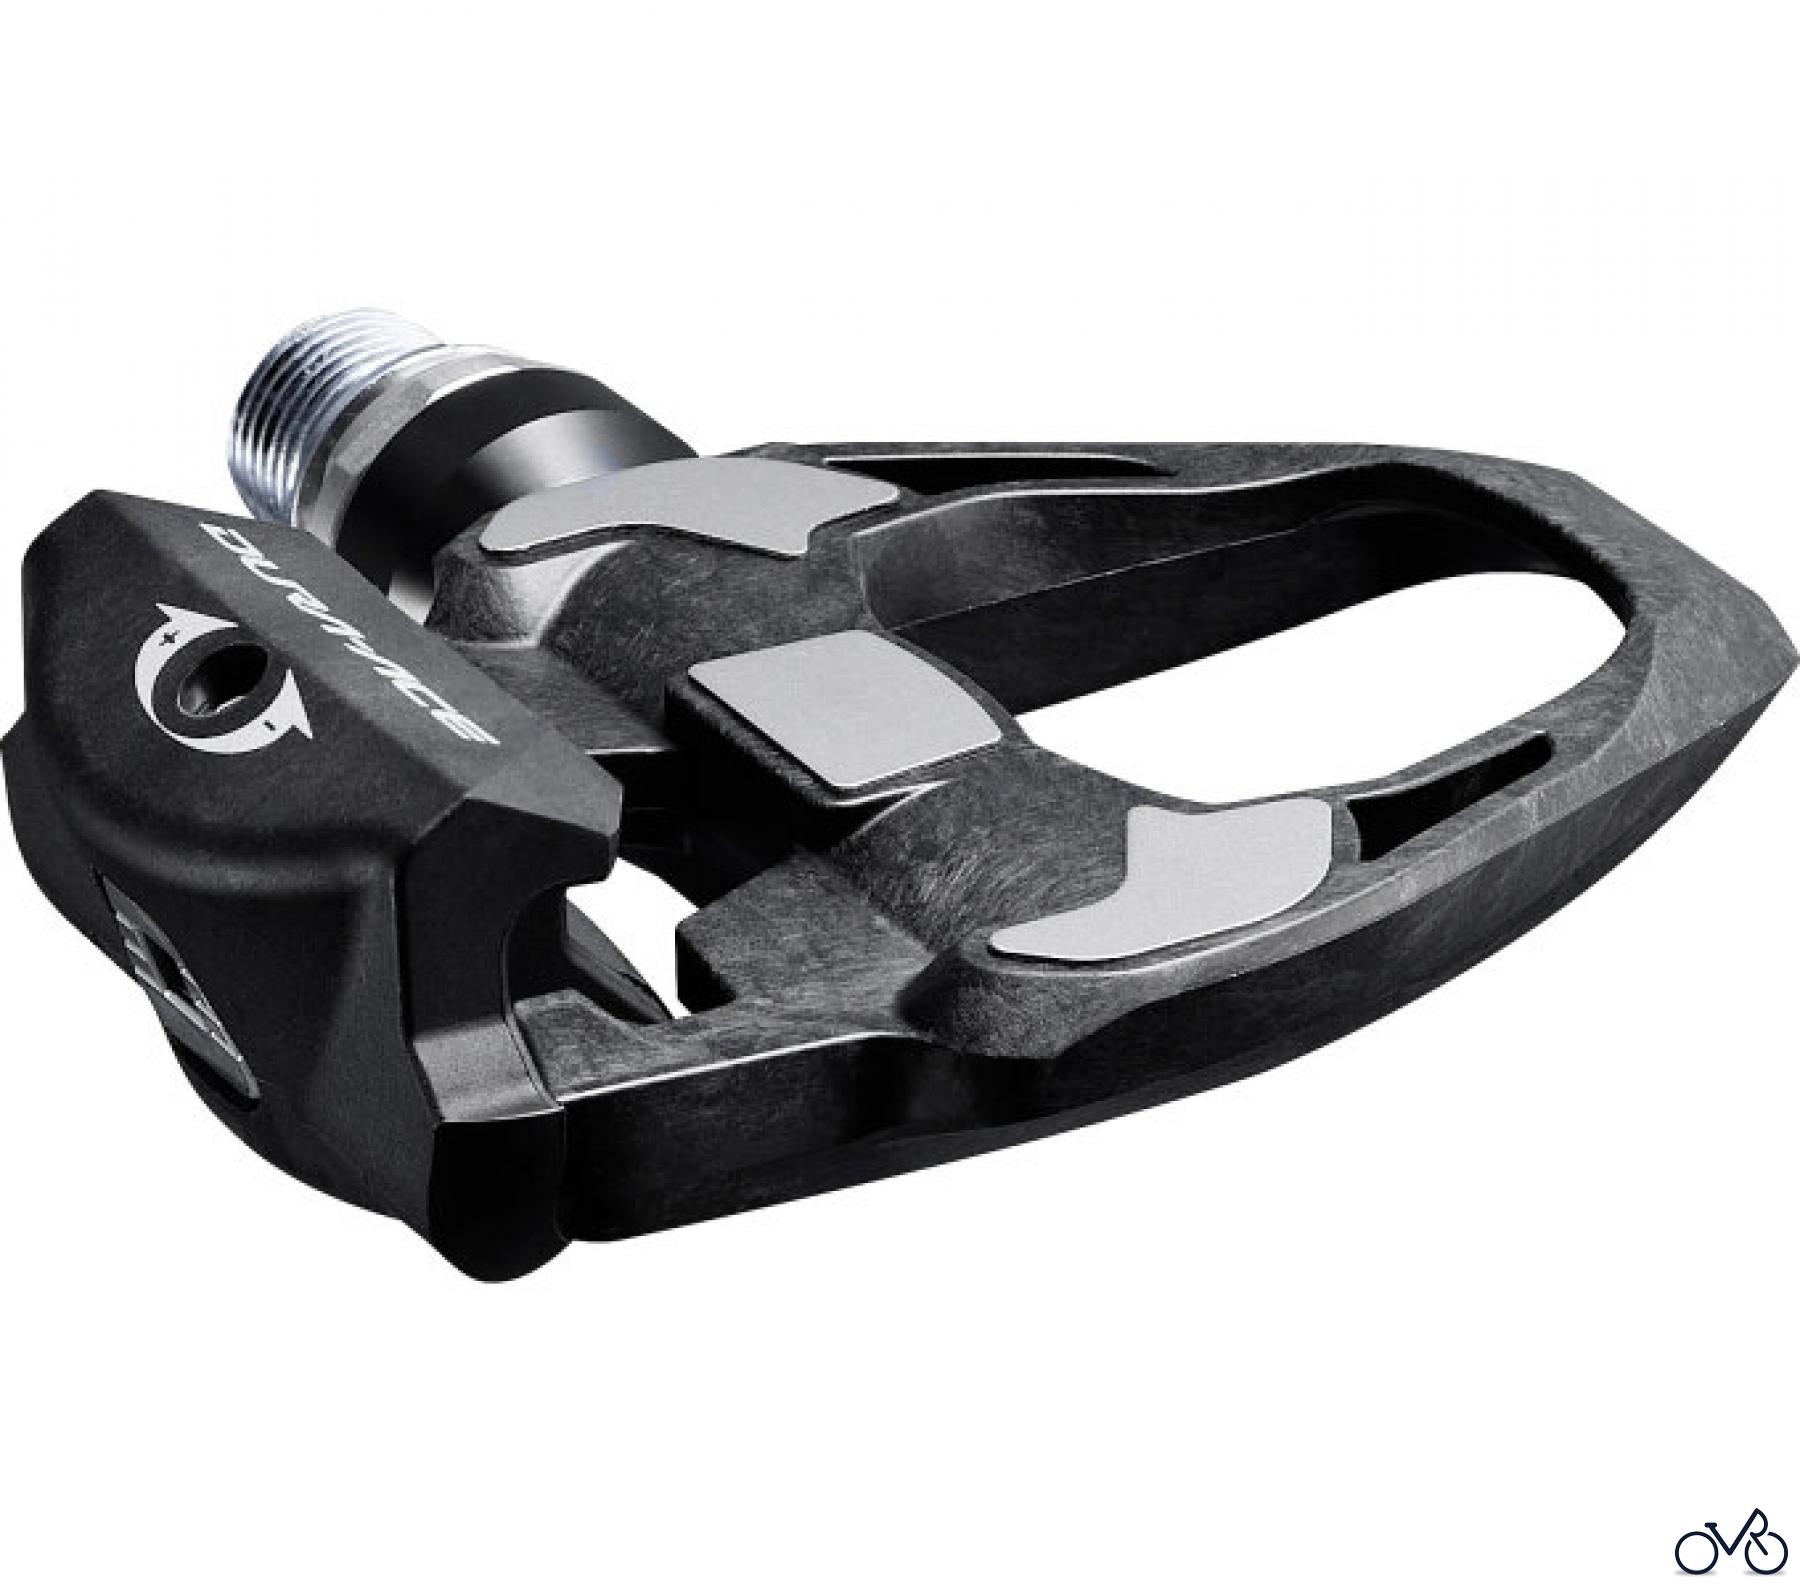  Shimano PD Pedal - Pedale